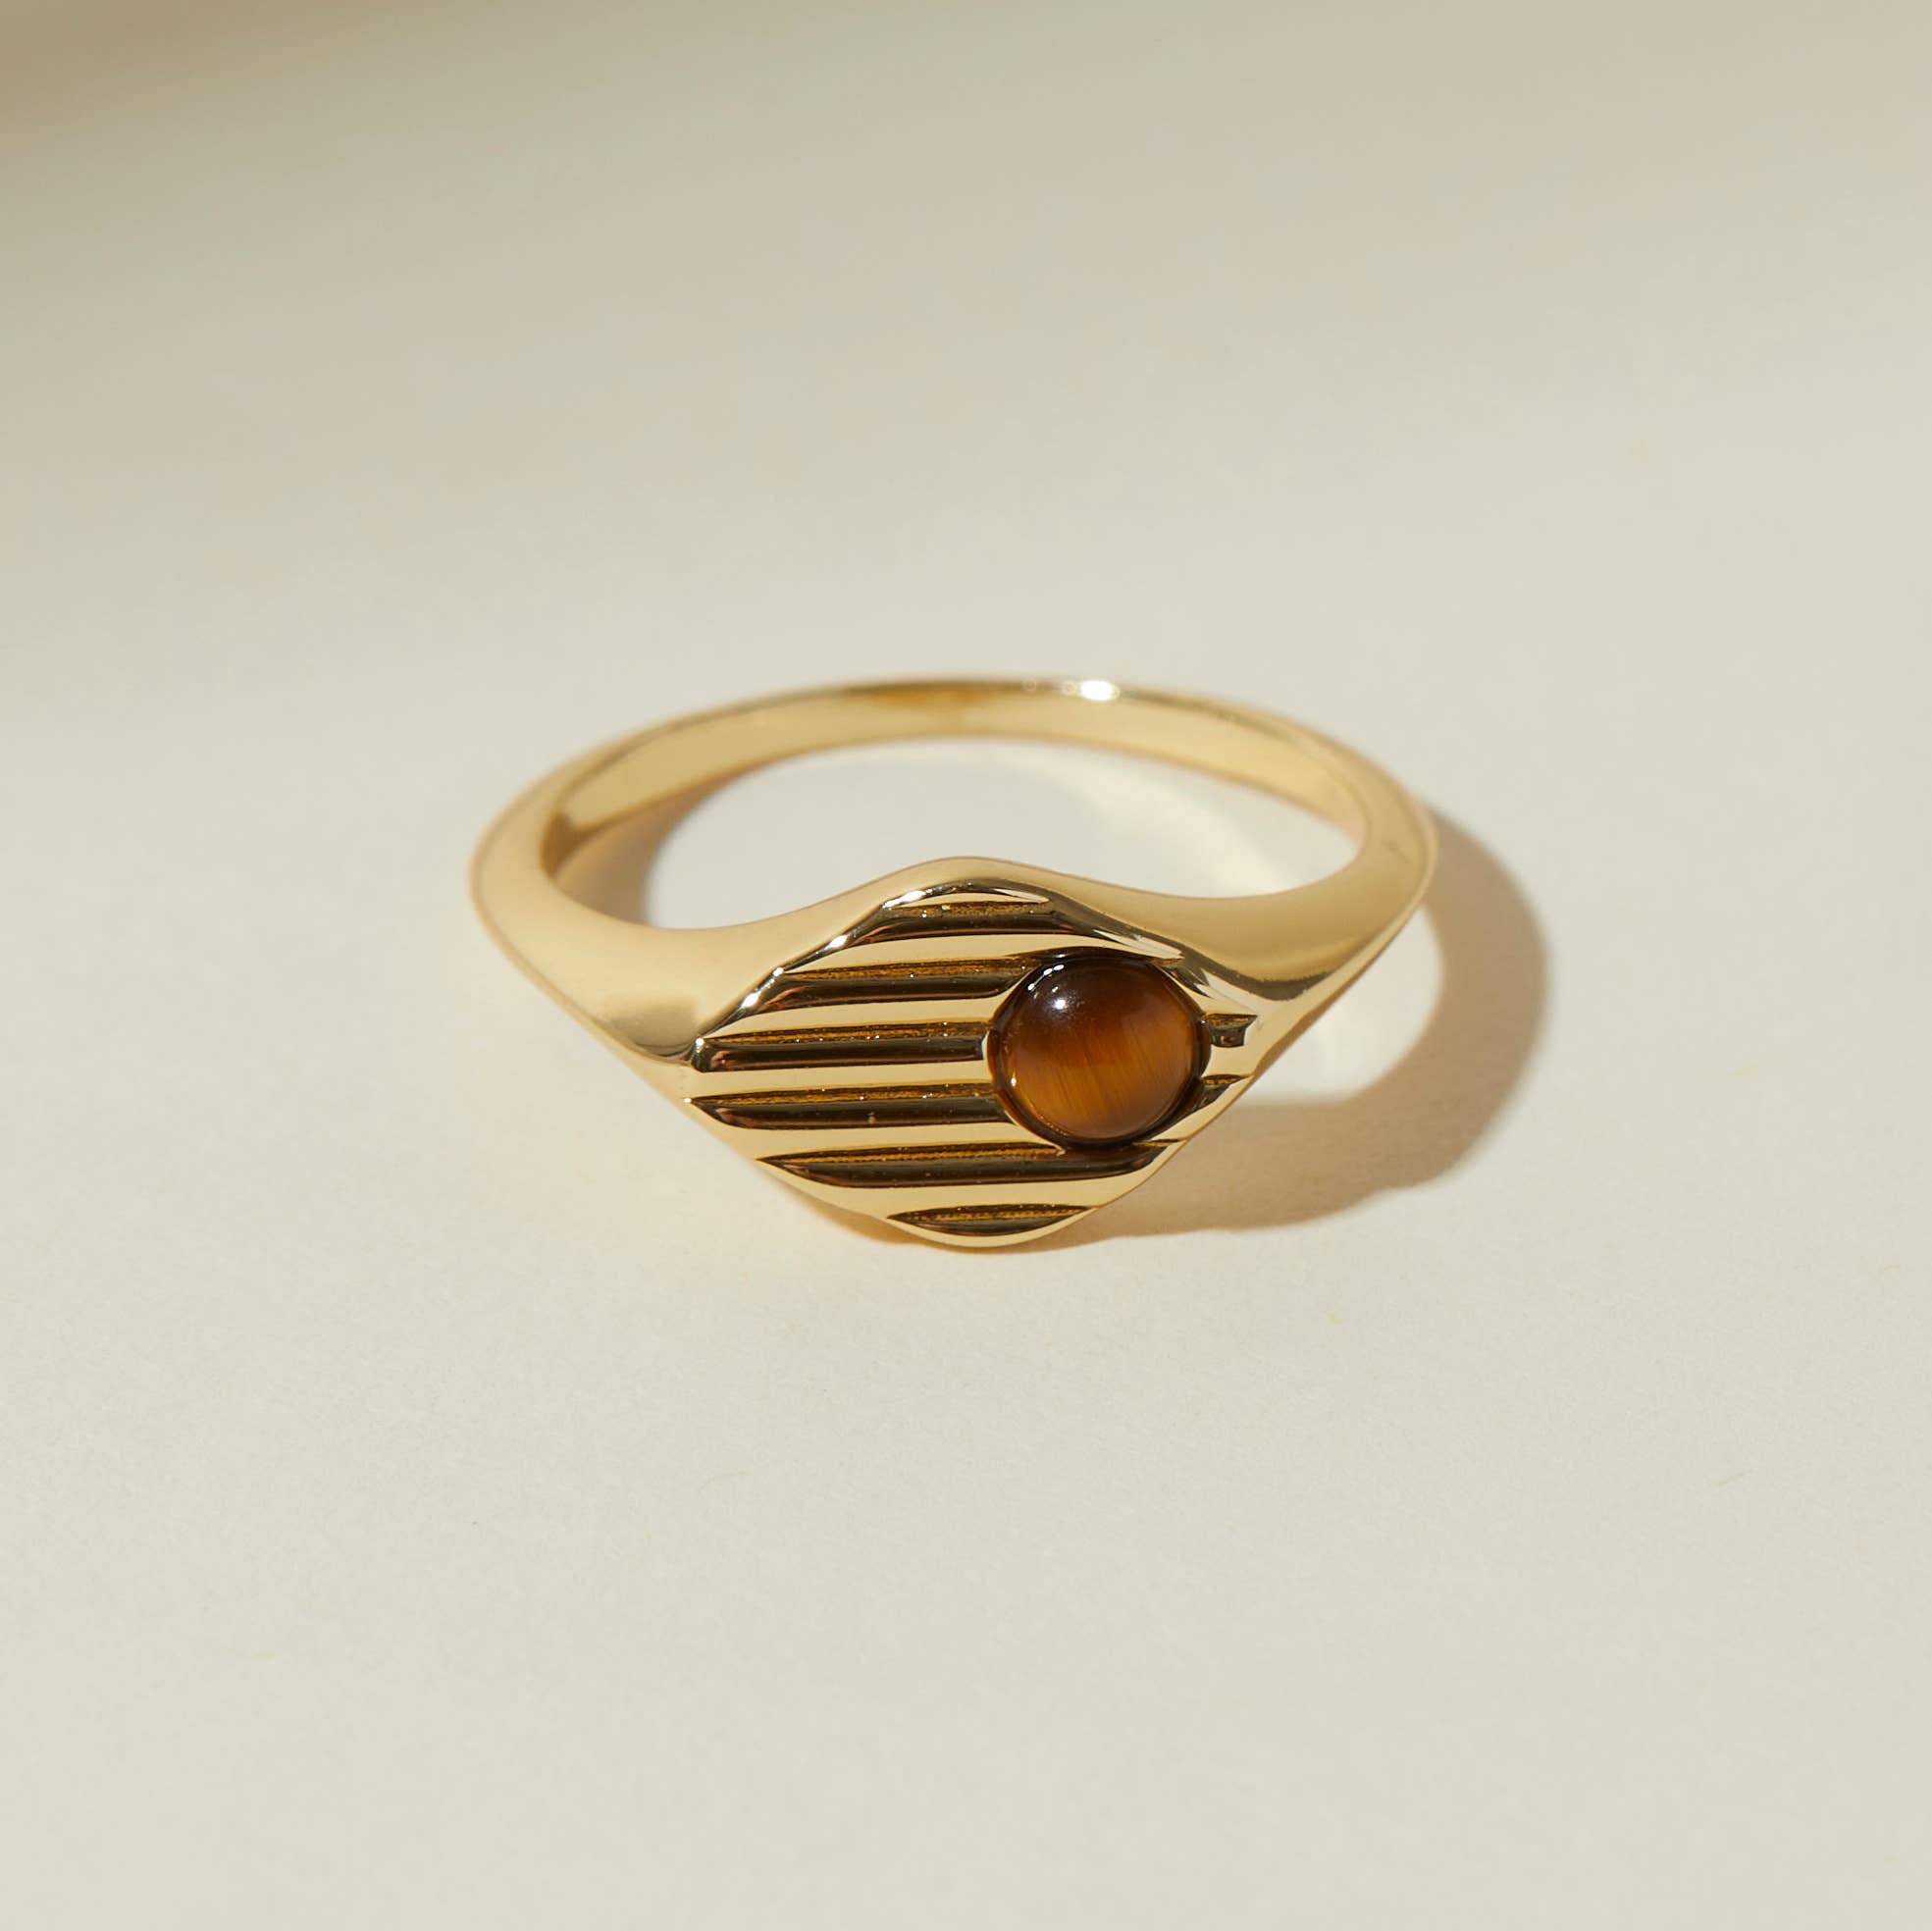 Lindsay Lewis Jewelry Remi Ring | Prelude & Dawn | Los Angeles